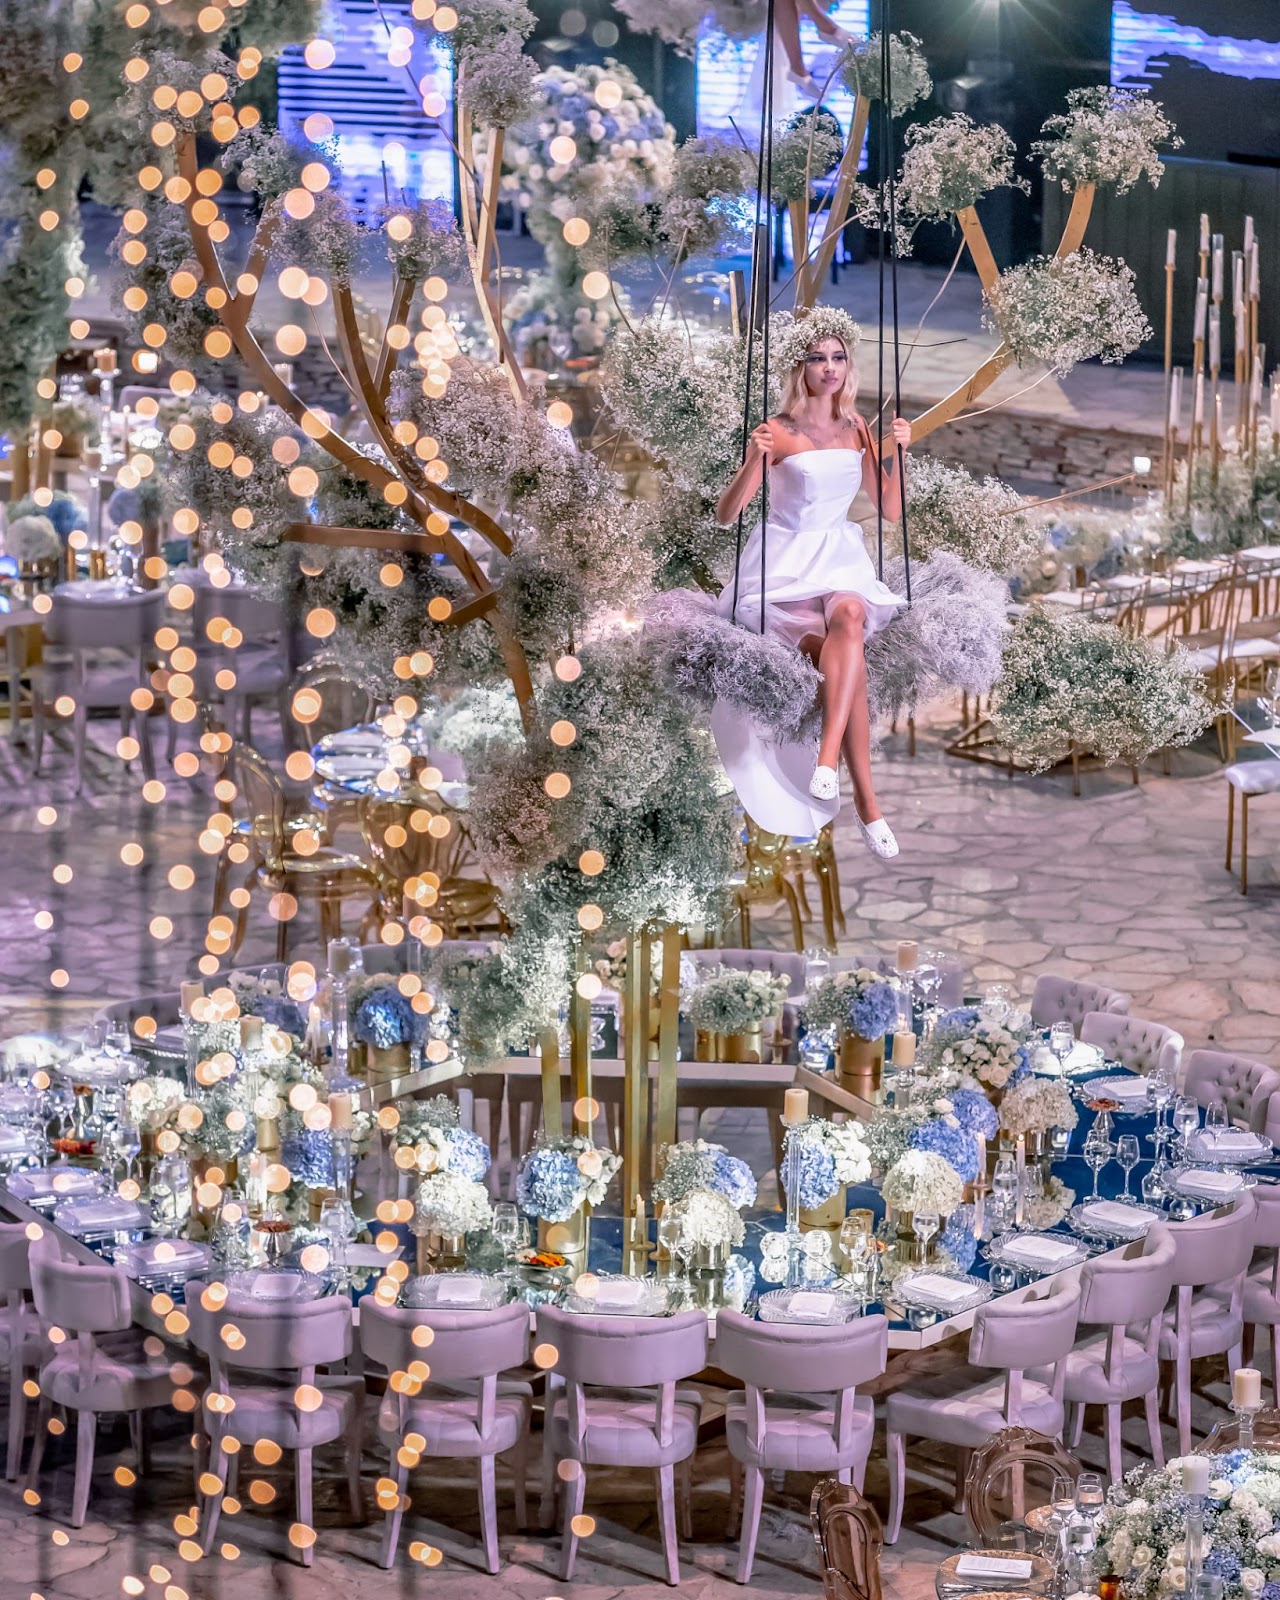 A wedding reception straight out of a fairytale by Diane Khoury.